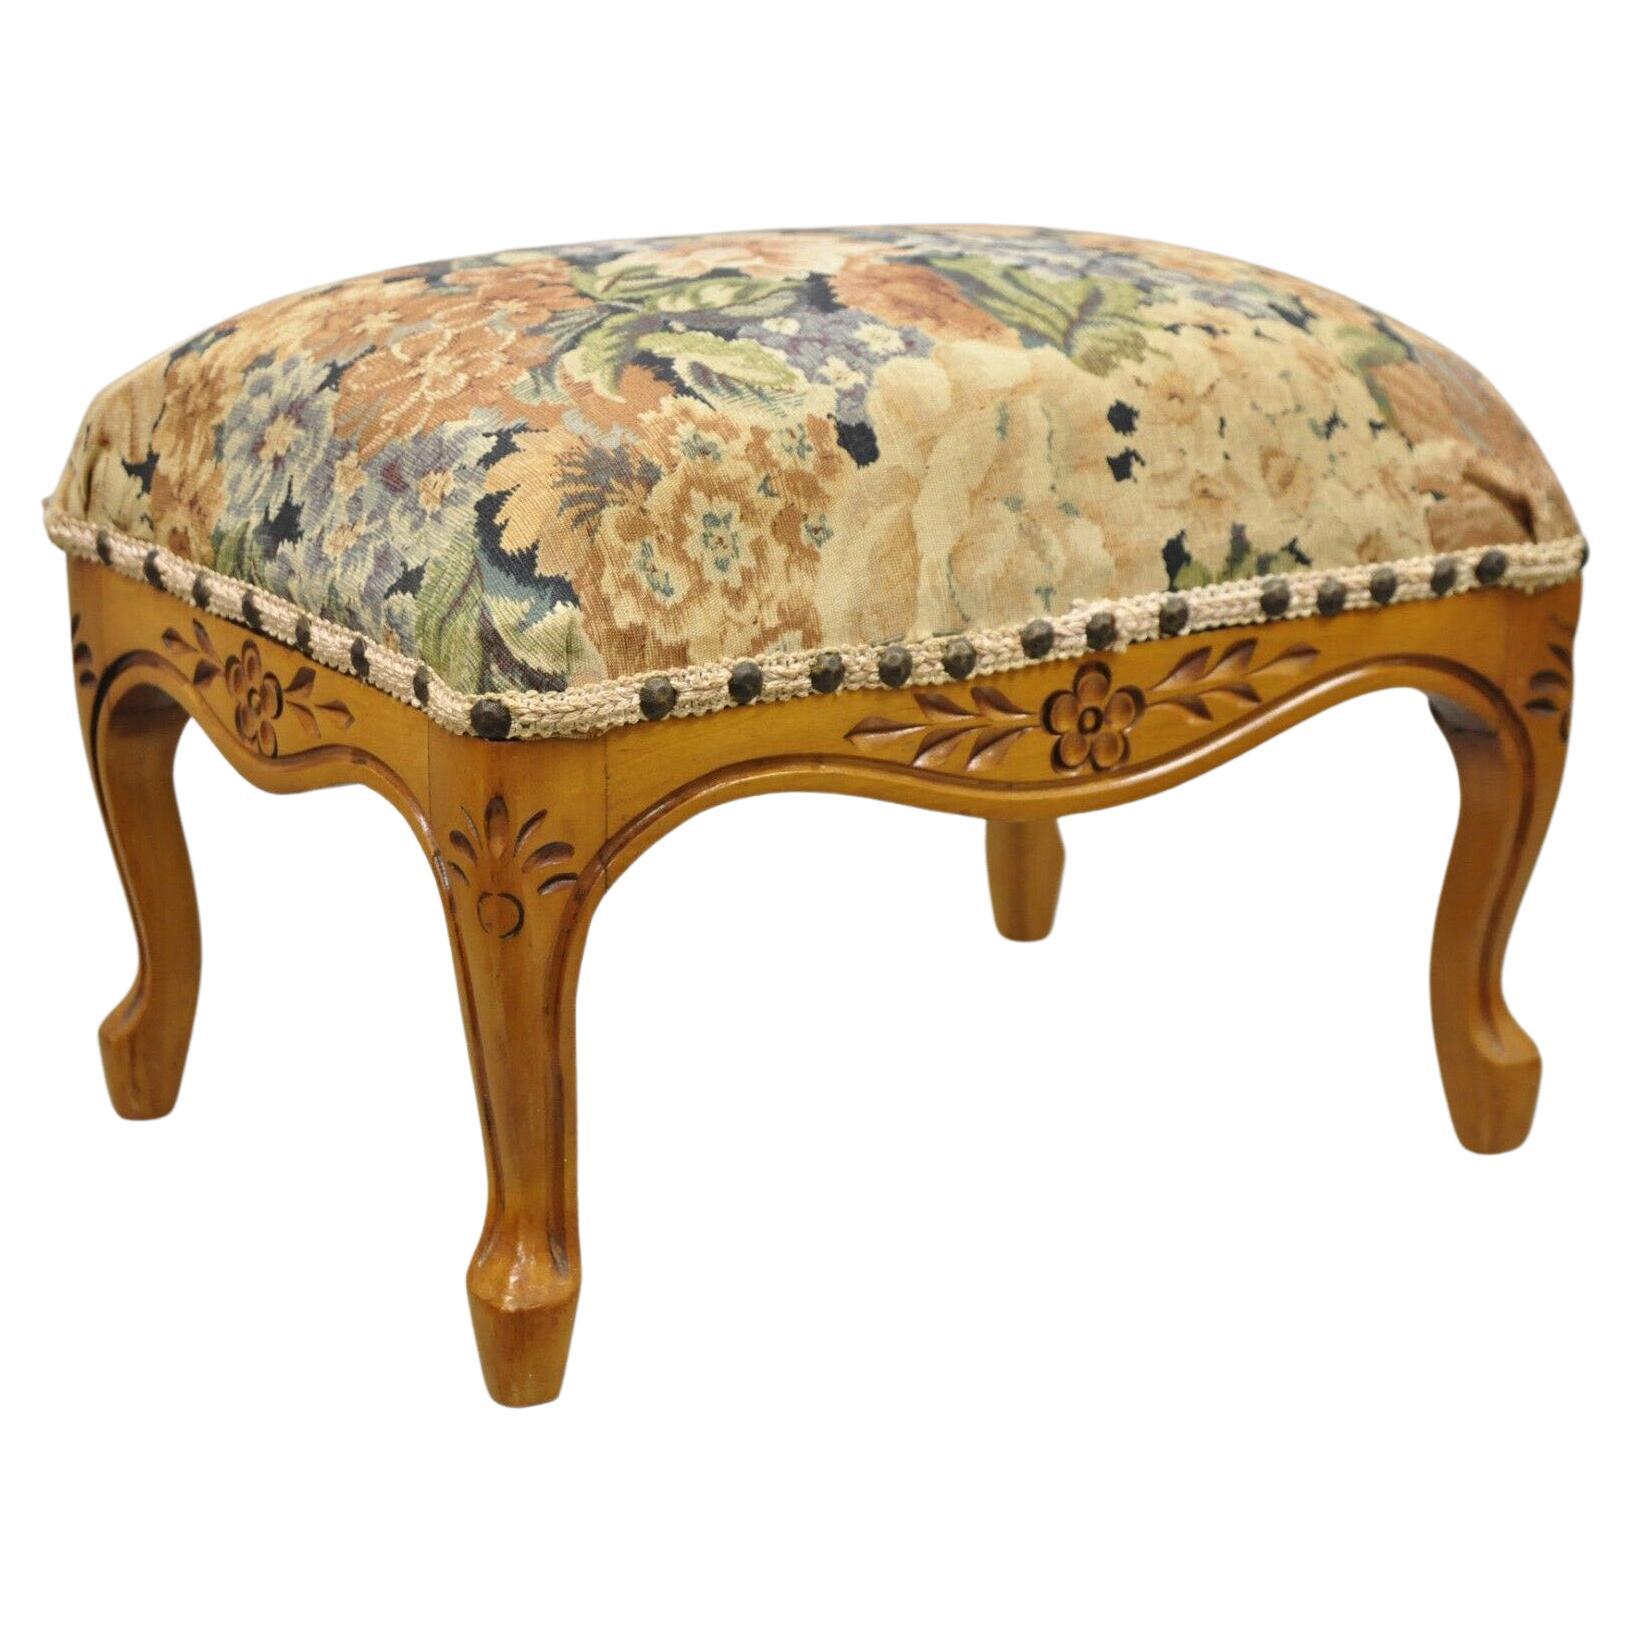 Vtg French Country Provincial Louis XV Style Maple Wood Small Ottoman Footstool